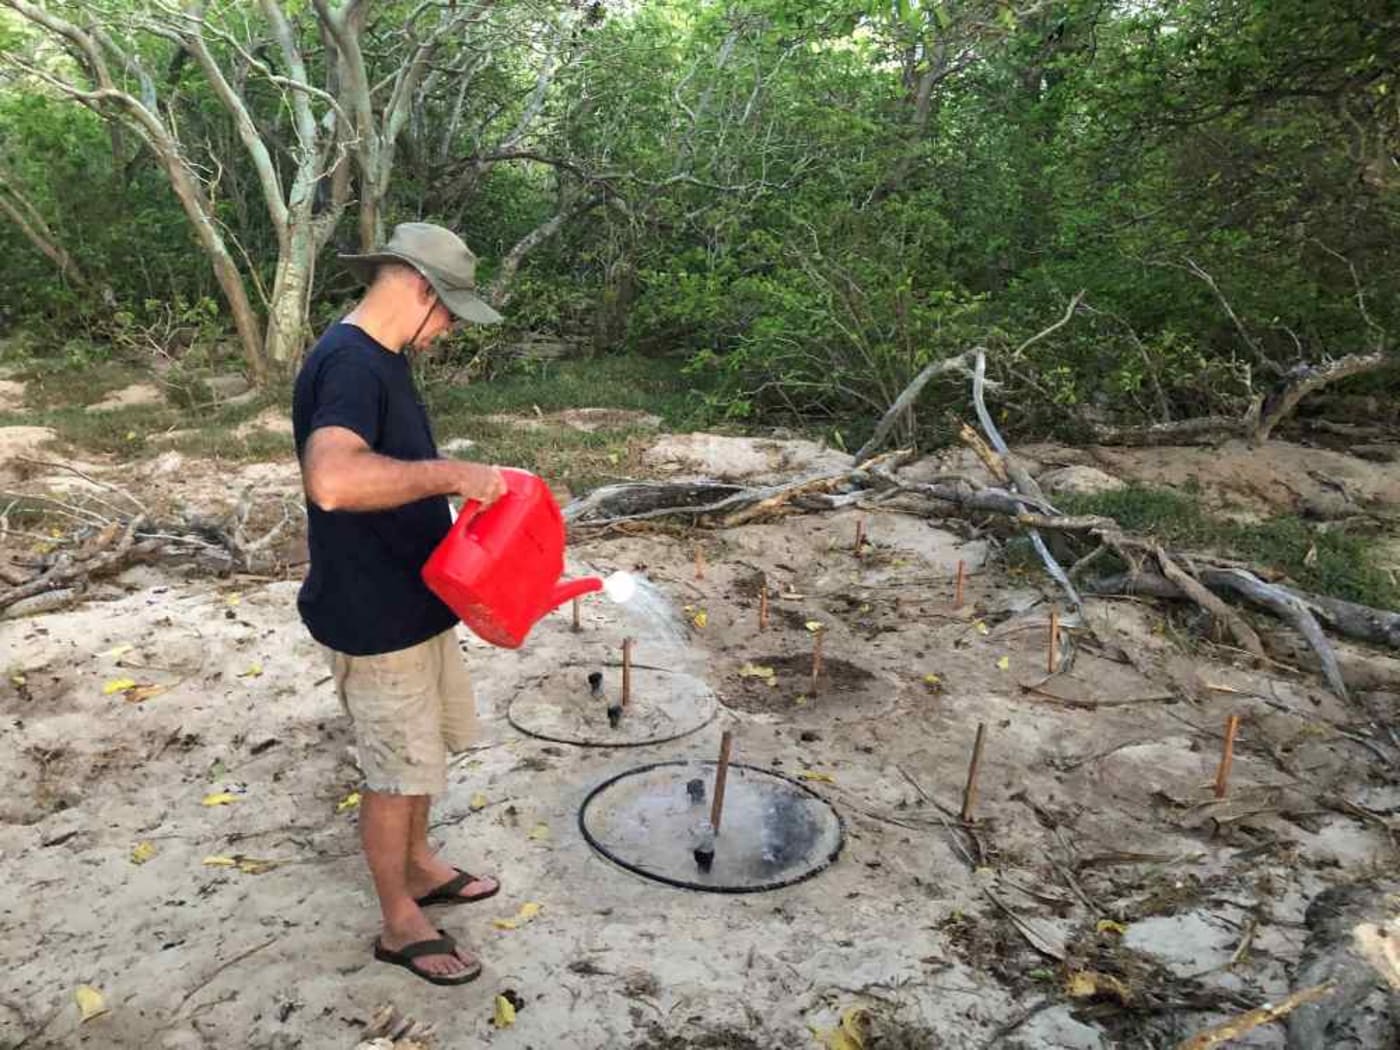 WWF-Australia and the University of Queensland with the support of Koala are conducting follow-up studies to the Turtle Cooling project launched in January 2019 on Milman Island.